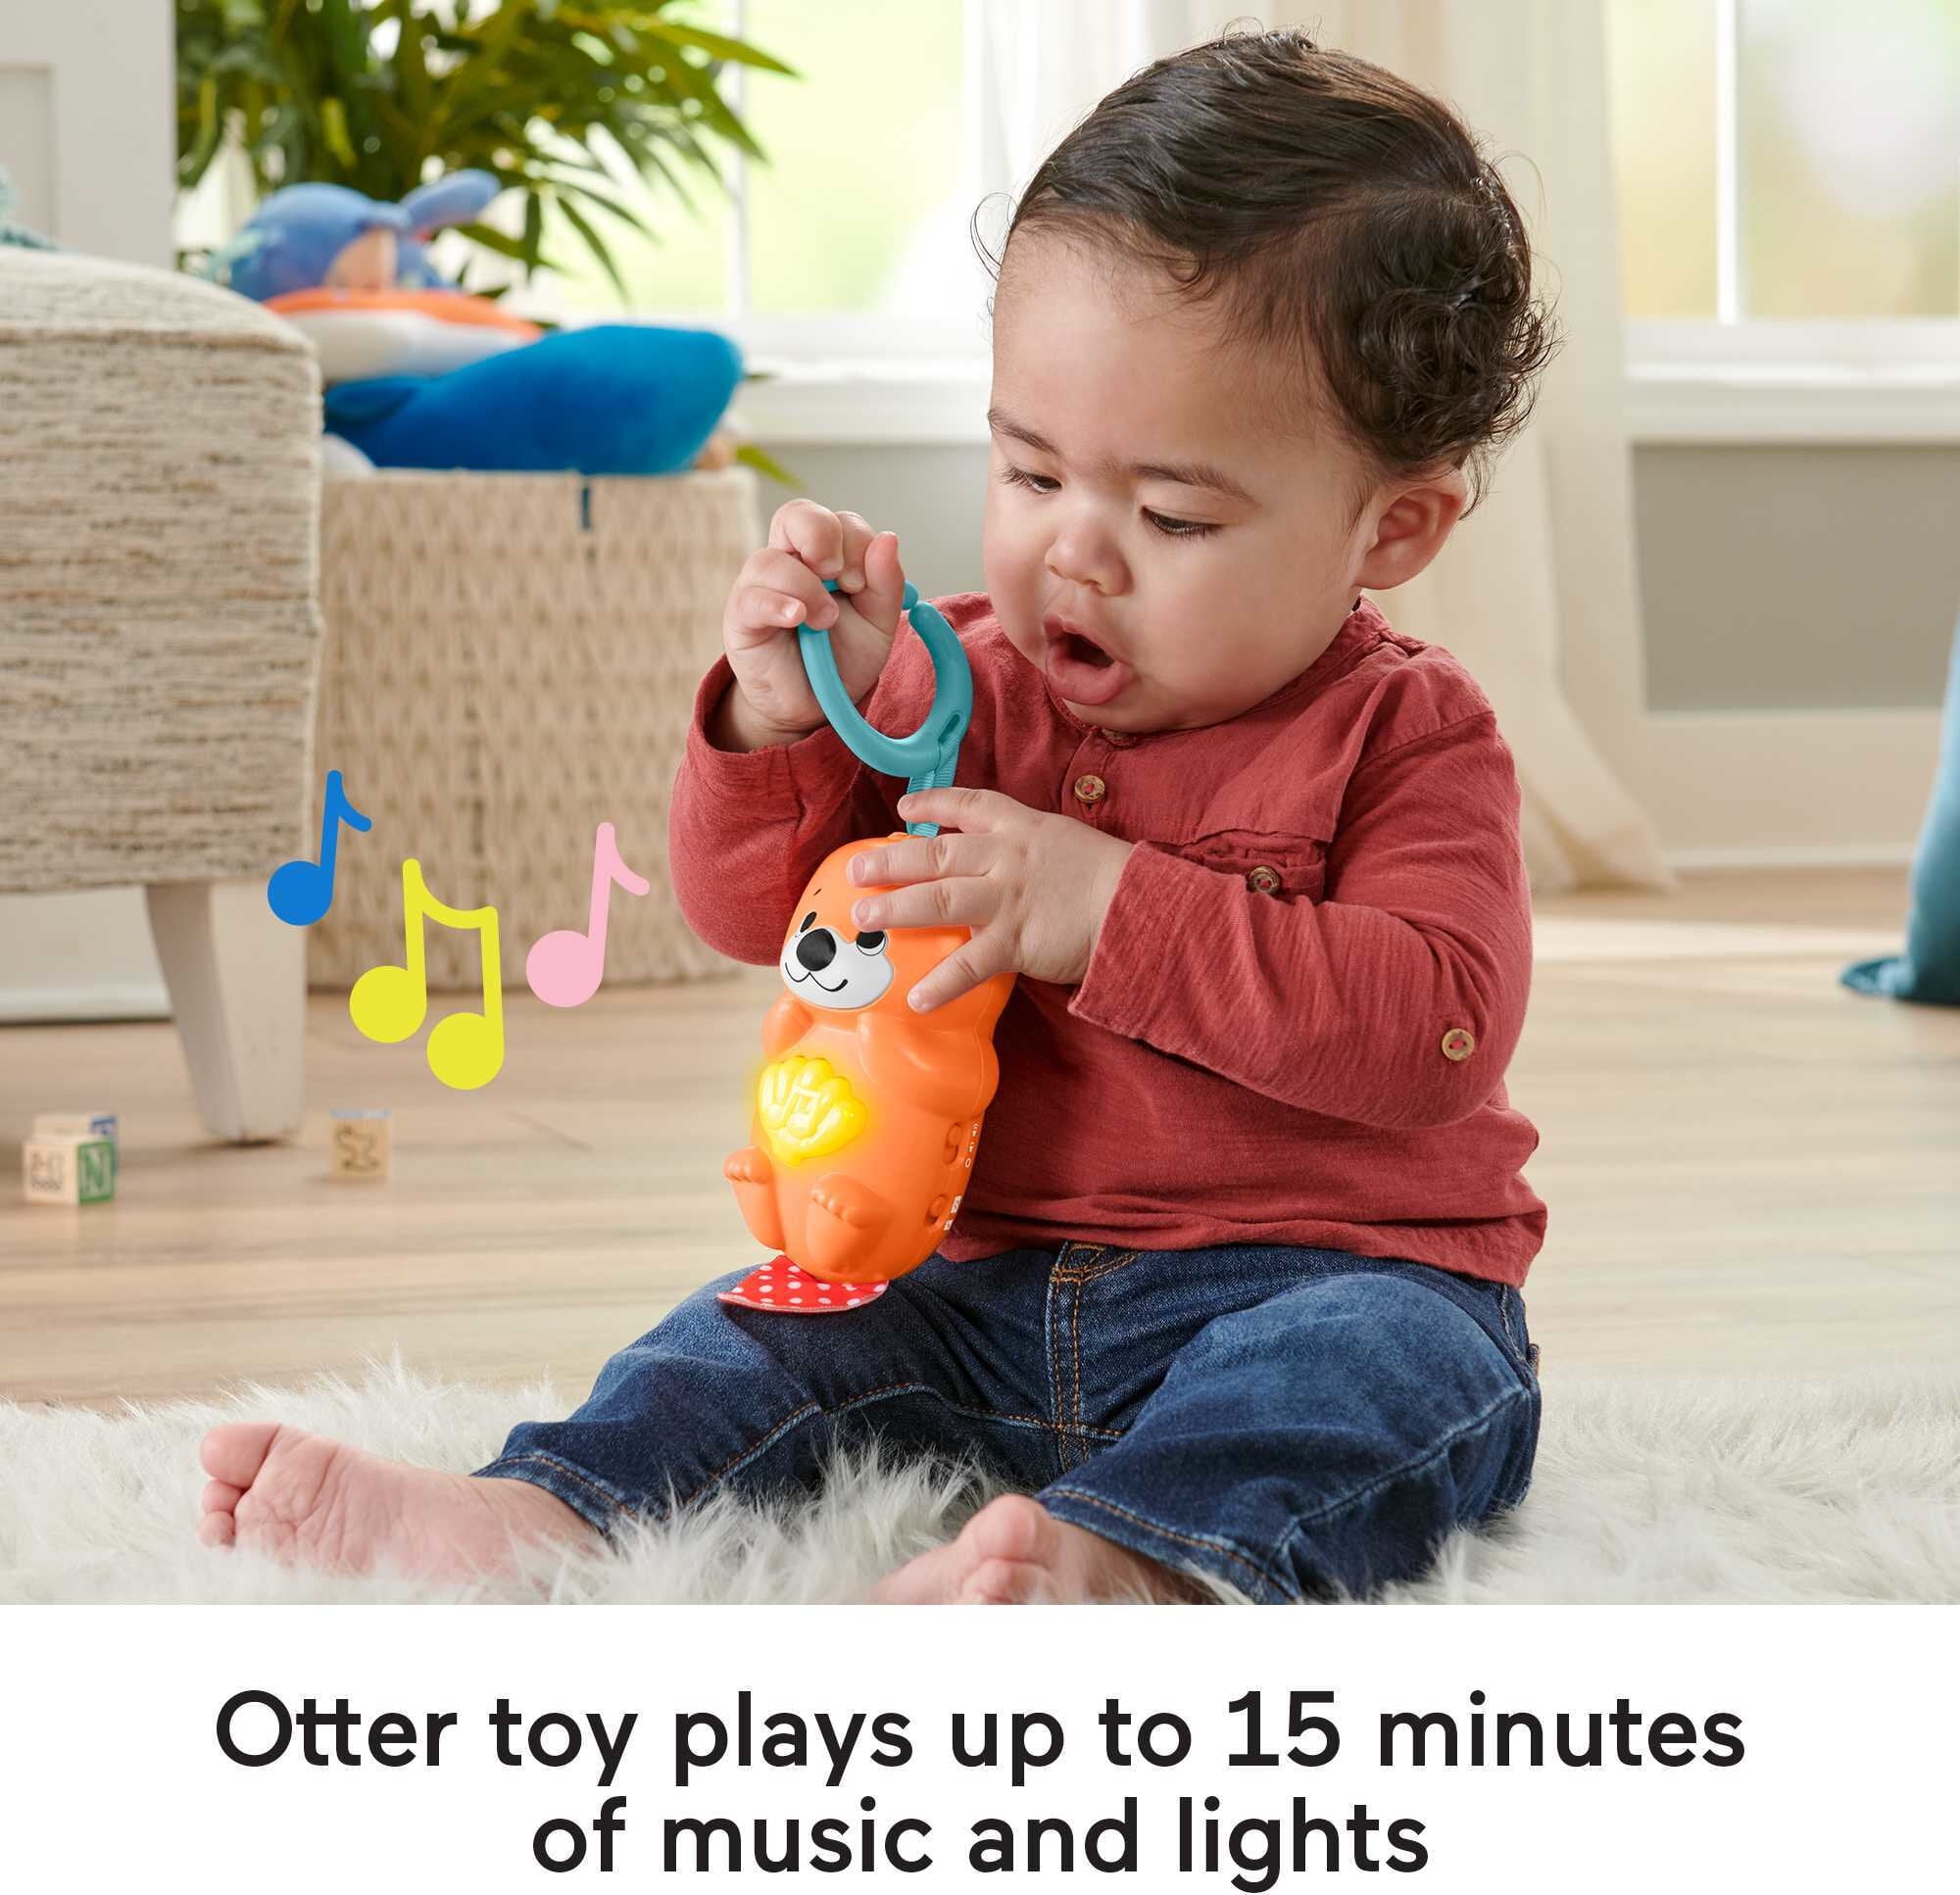 Fisher-Price 3-in-1 Baby Gym Playmat with Sensory Toys Lights and Sounds, Music Glow and Grow Gym - 3